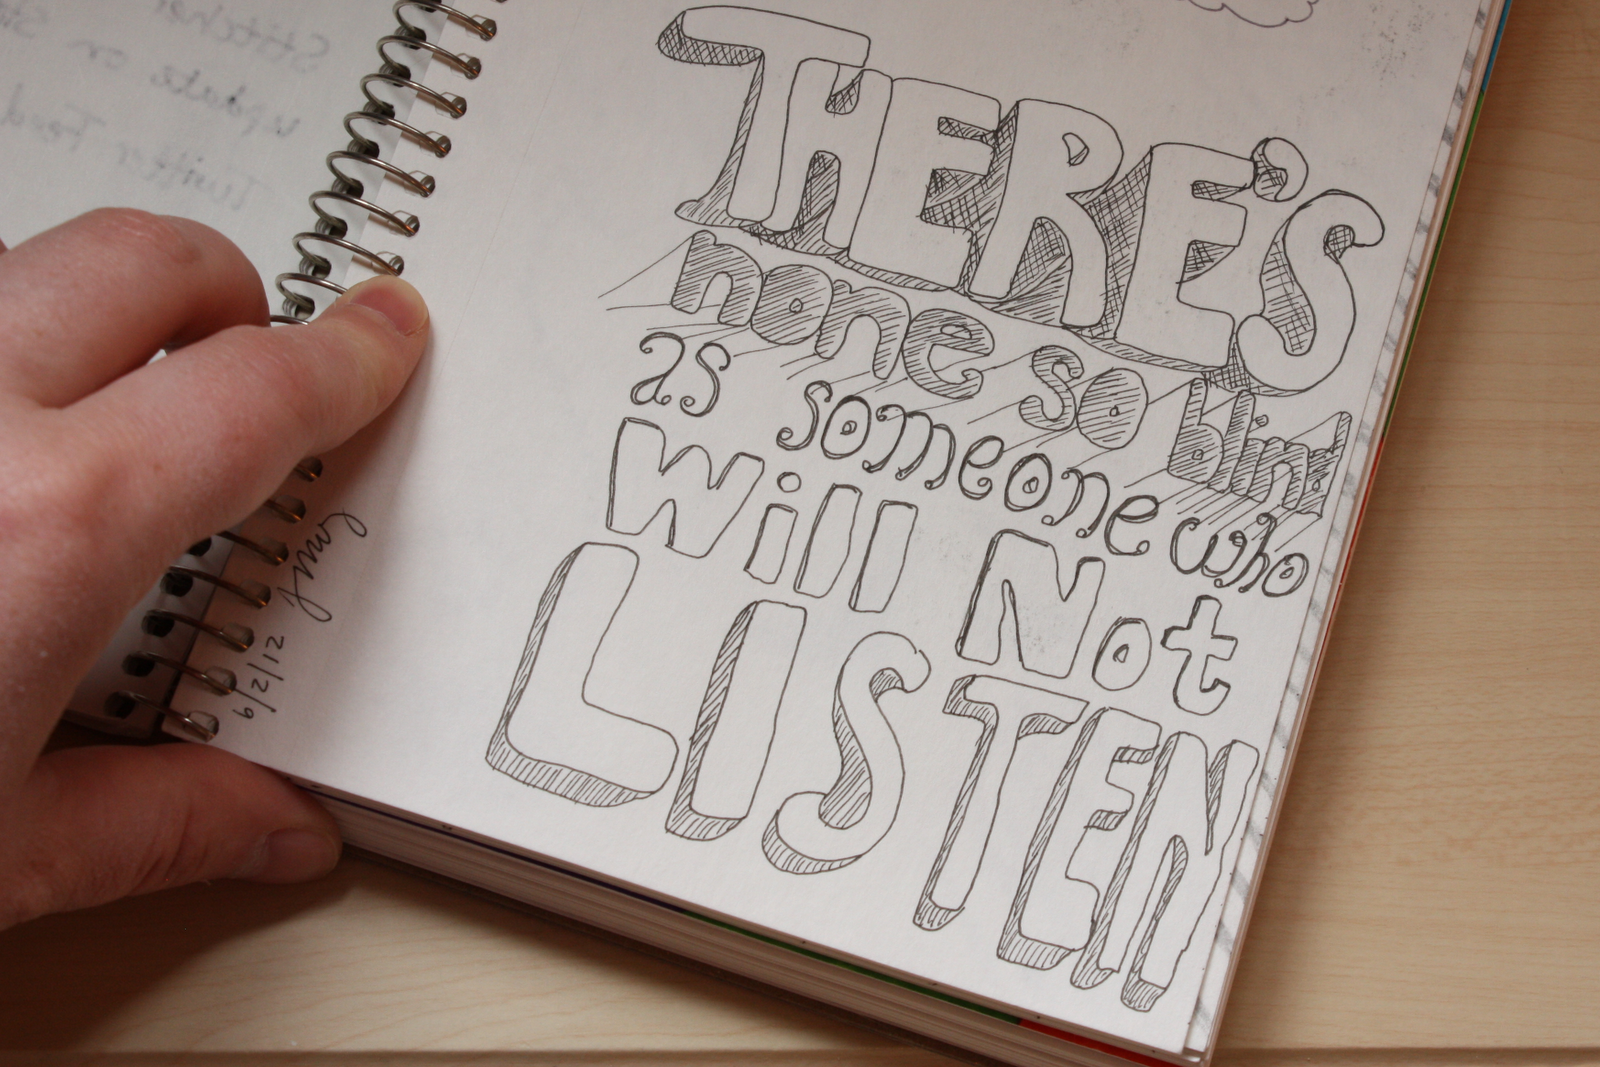 Lessons I've Learned Through my Sketchbook